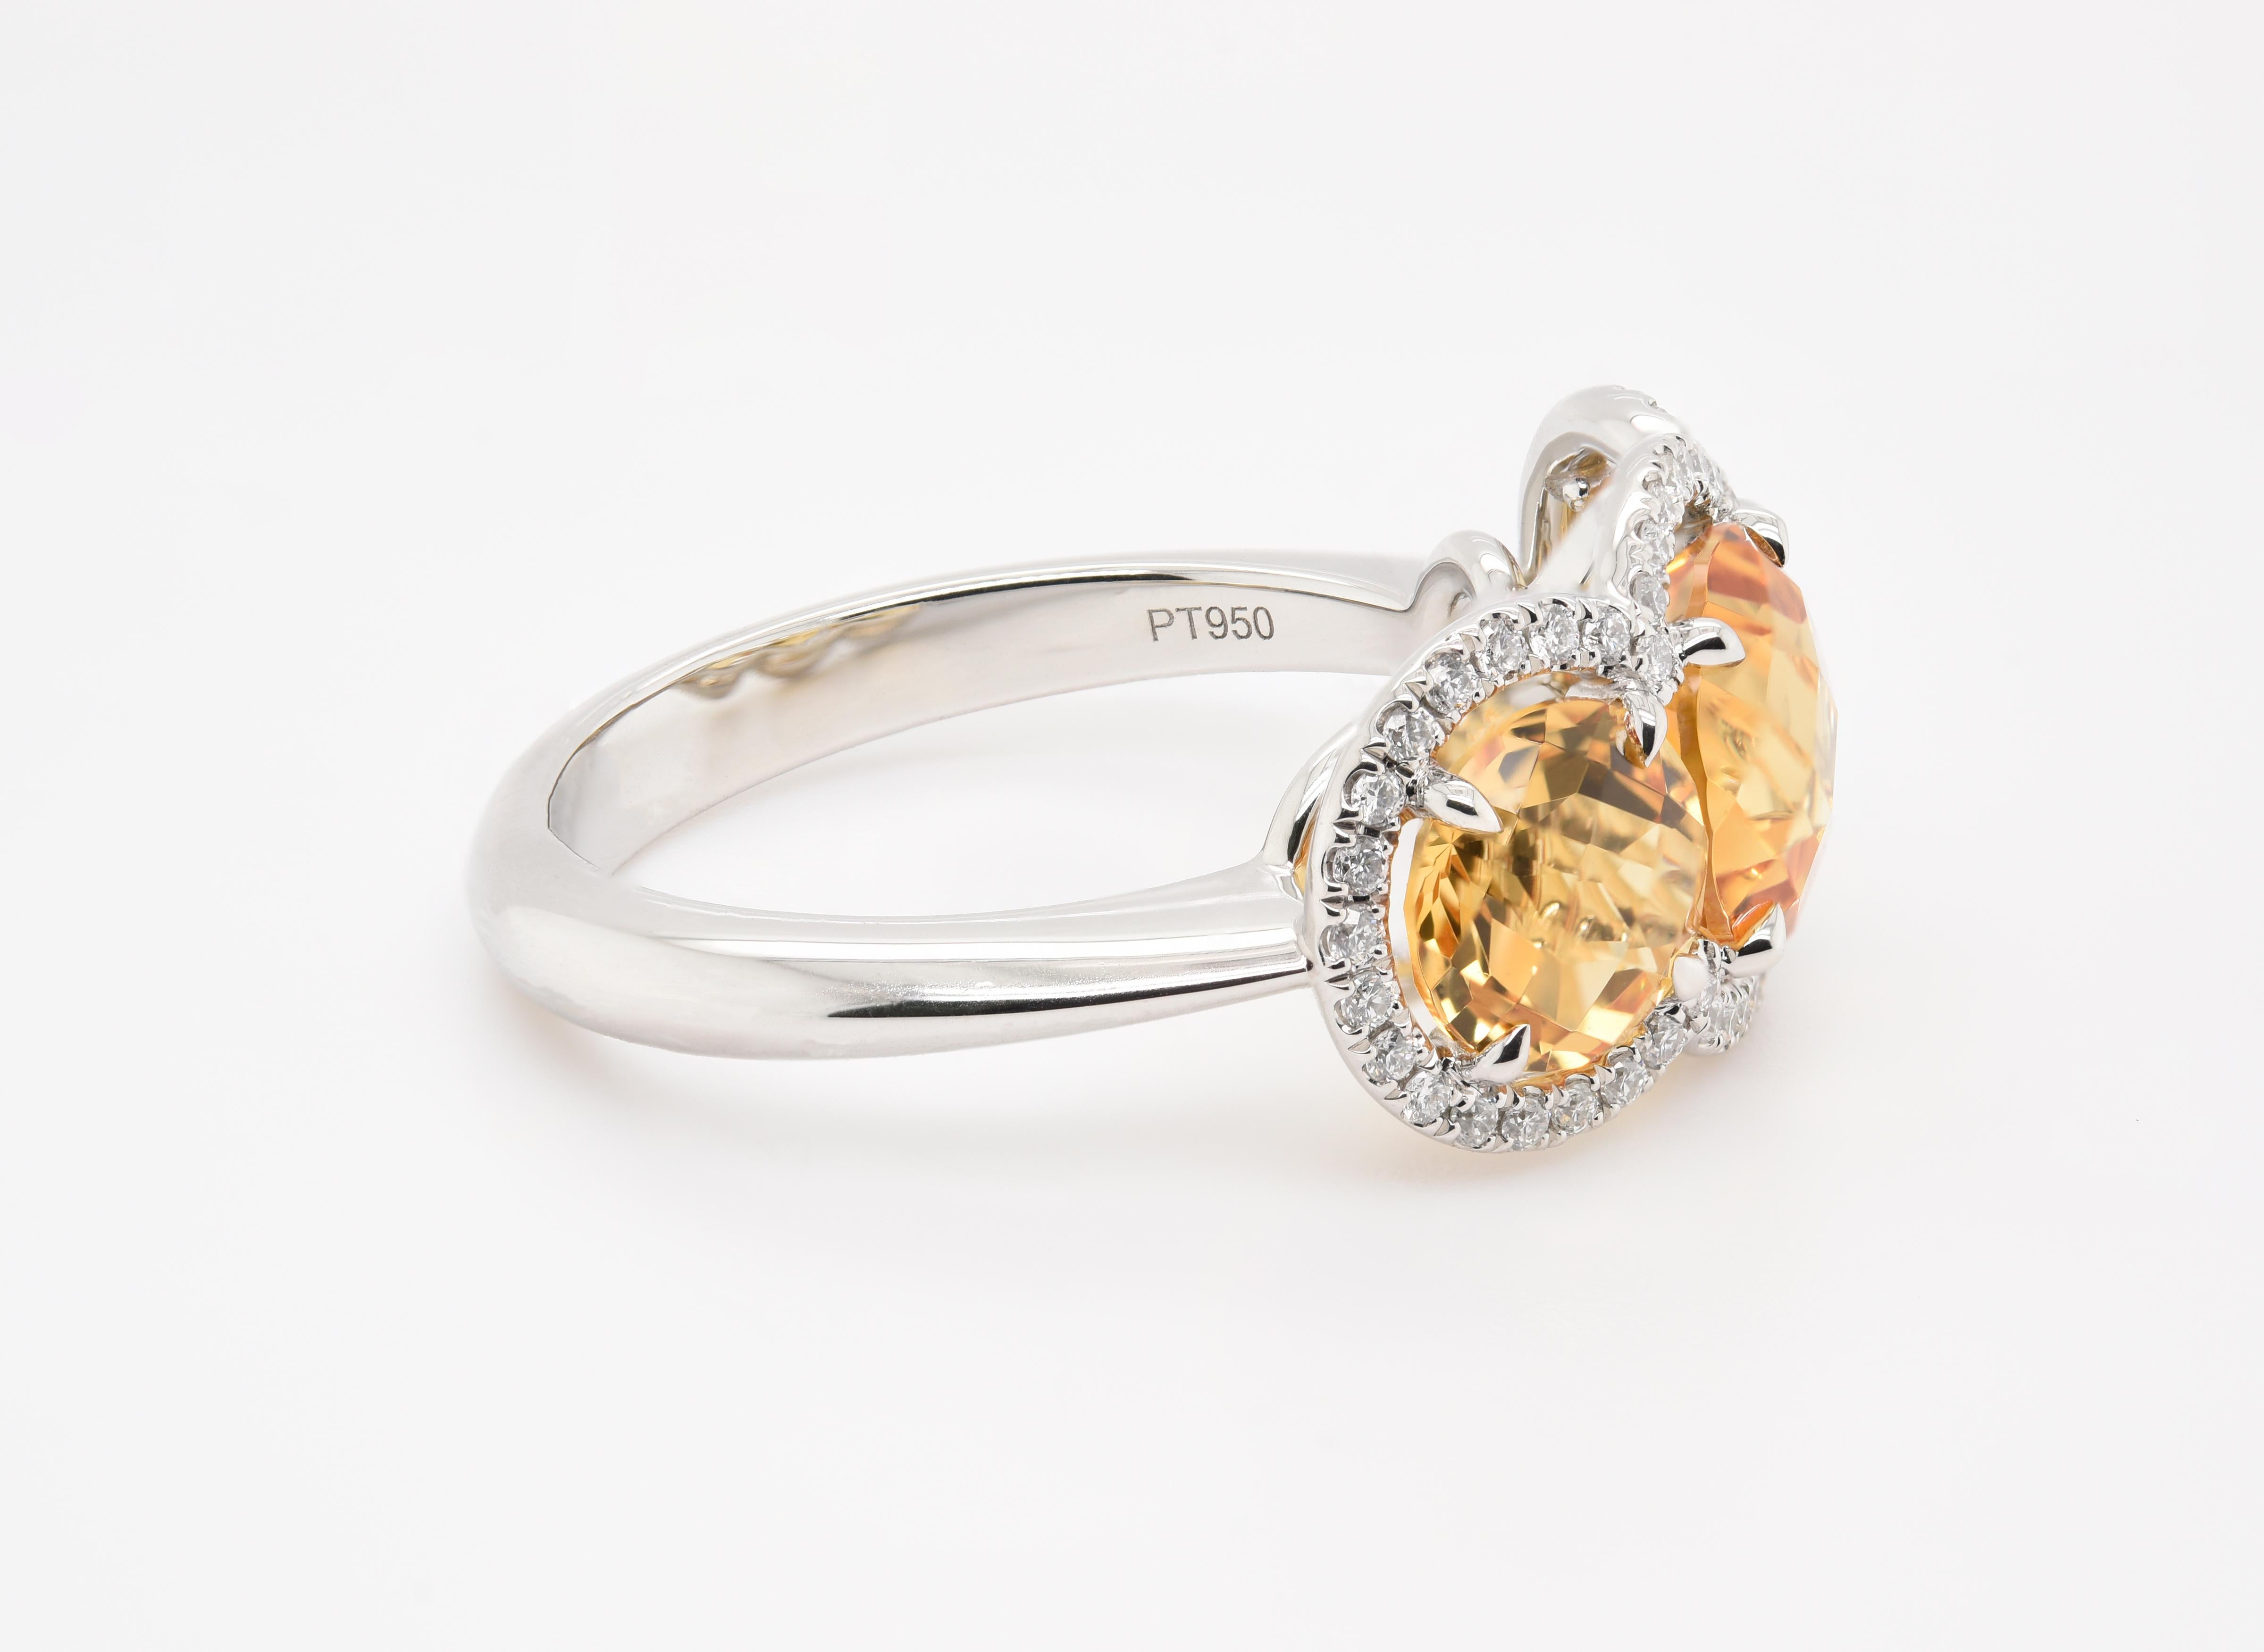 JAG New York created for you this citrine surrounded by diamond halos that is comprised of 3.40 carats total gemstone weight of citrine and diamonds set in platinum.  

Unapologetic self-expression through jewelry. JAG New York's world class designs